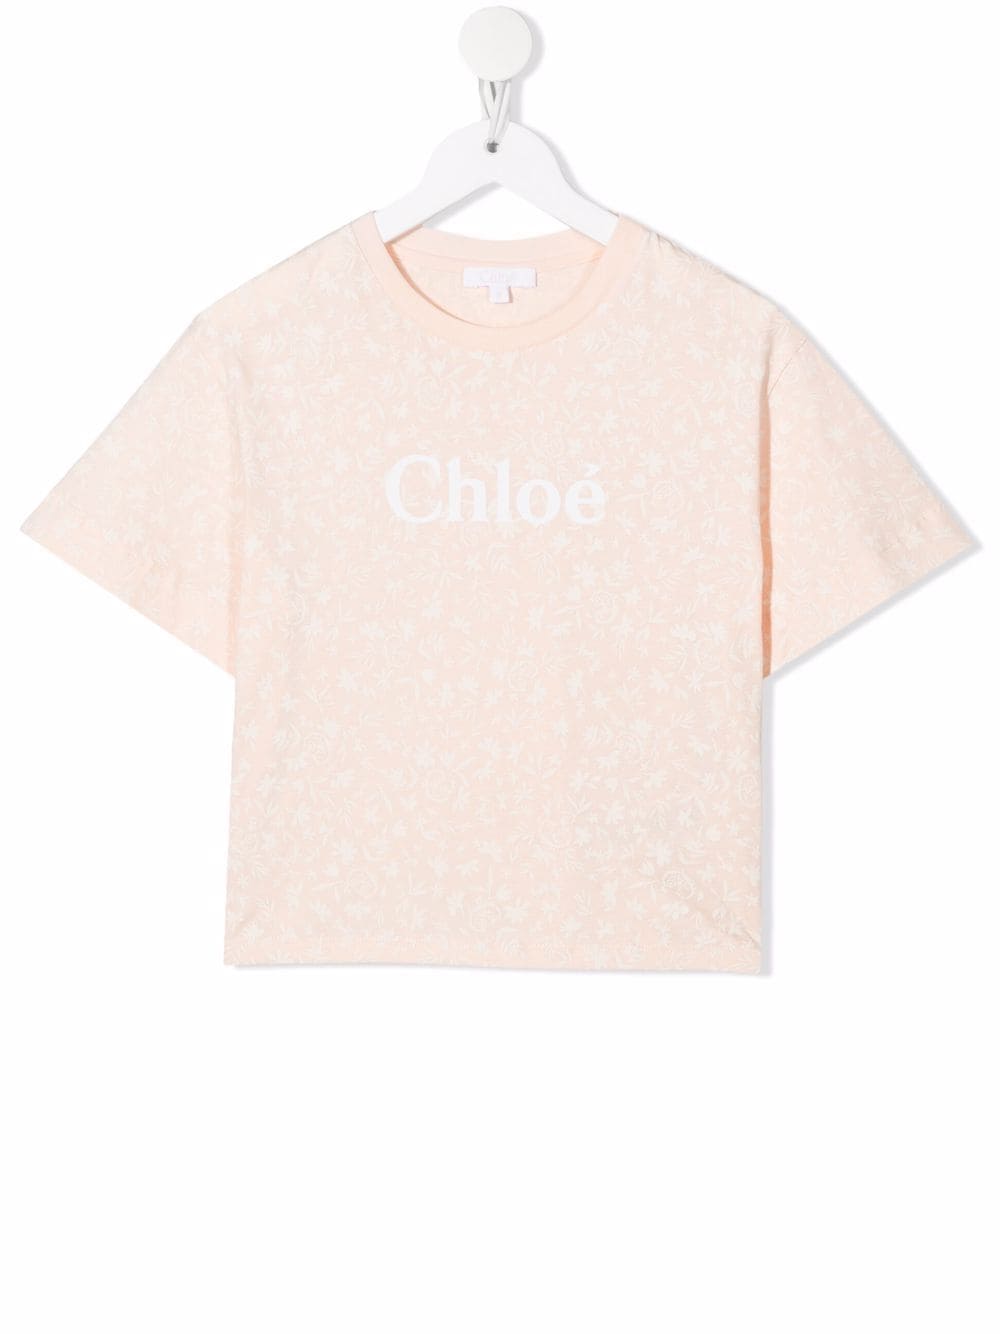 Chloé Kids Light Pink T-shirt With Contrast Logo And All-over Floral Print